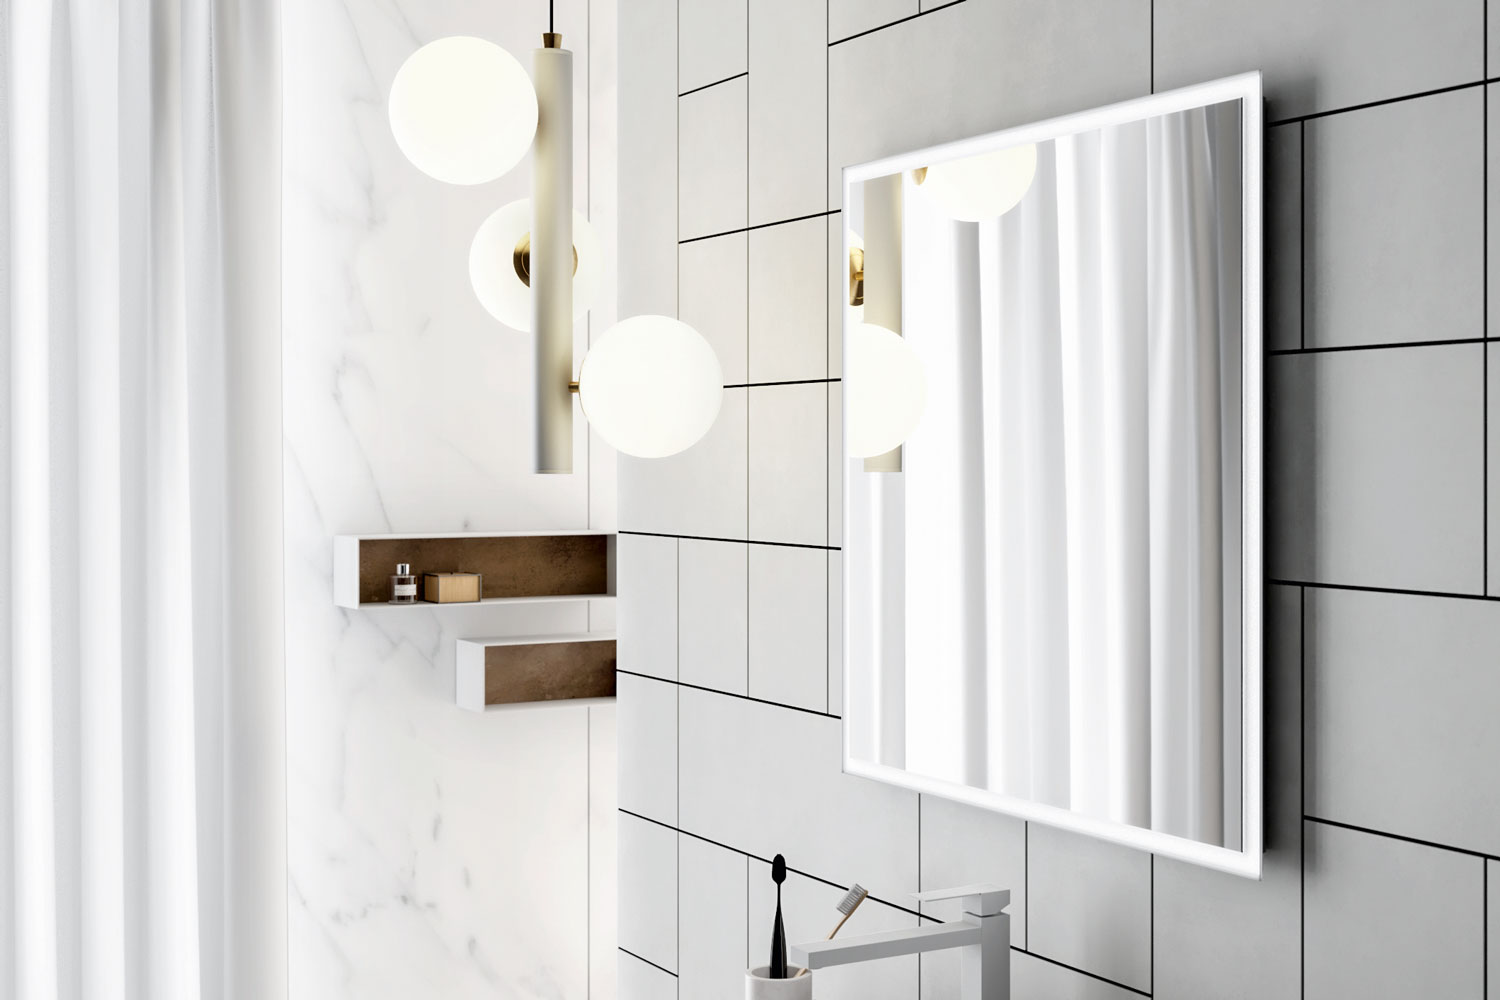 Why choose LED lighting (even in the bathroom!)